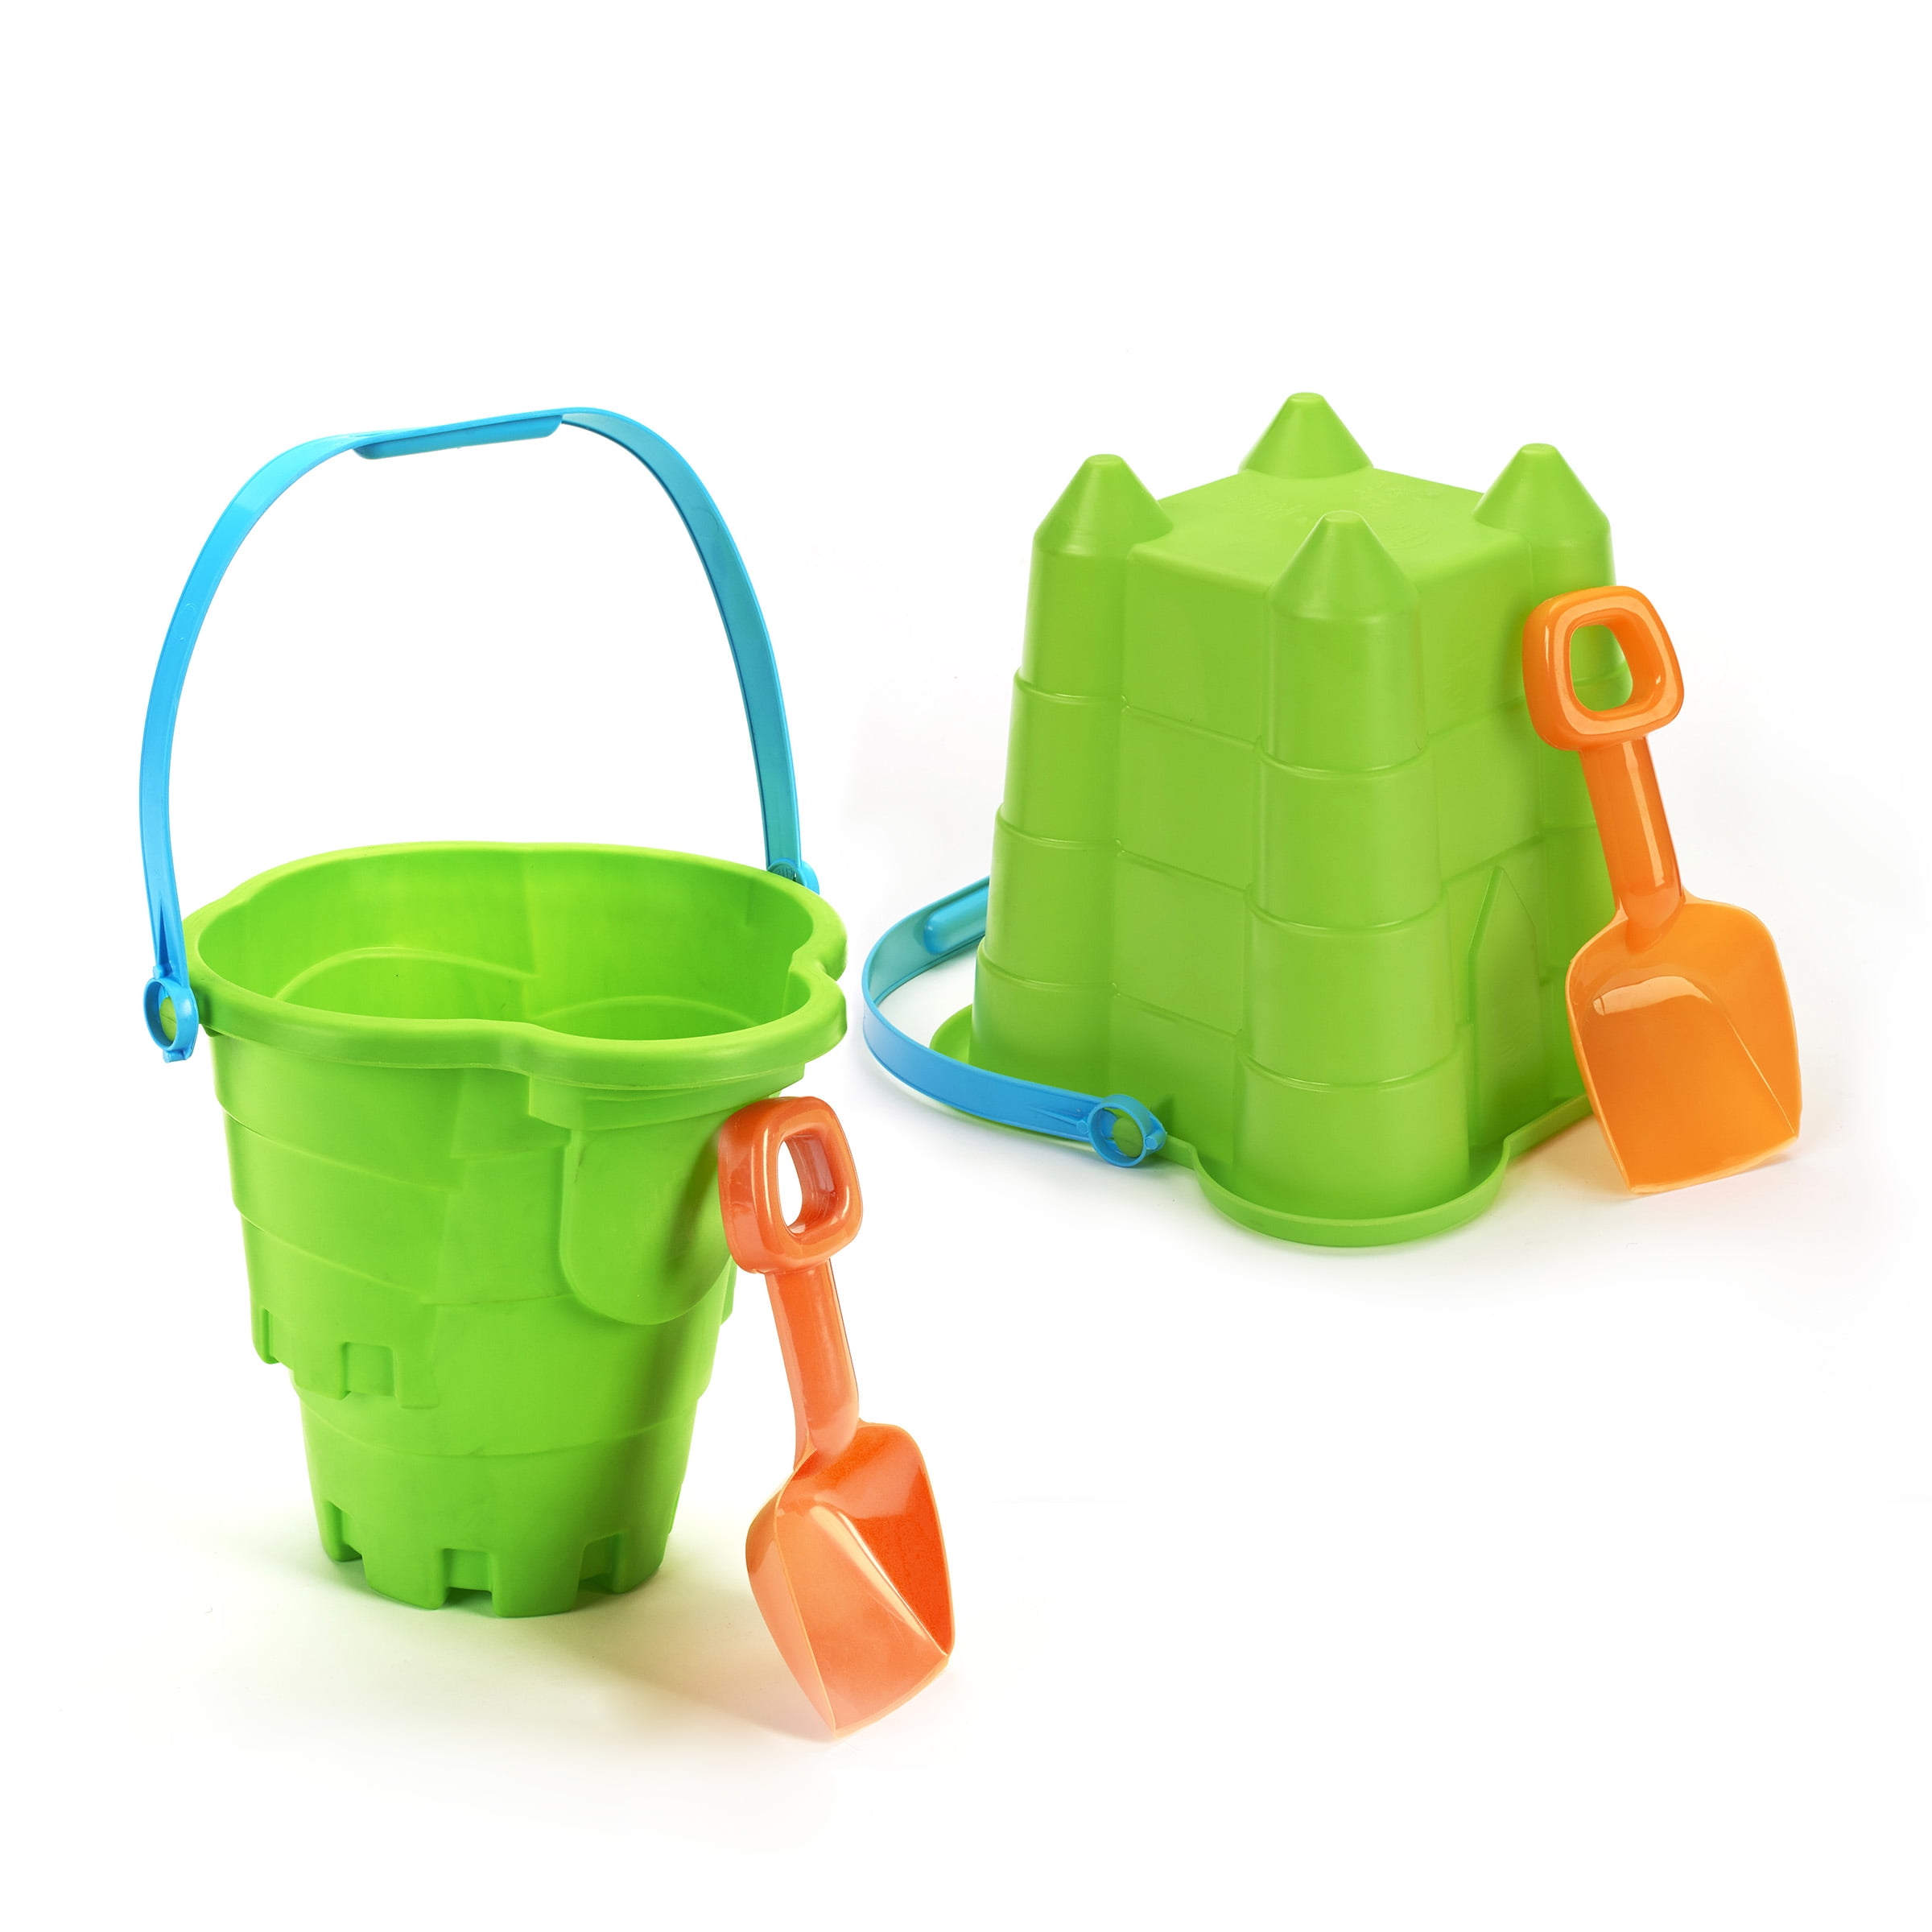 Take it to the beach! with Bright coloured accessories Castle Sand Bucket 